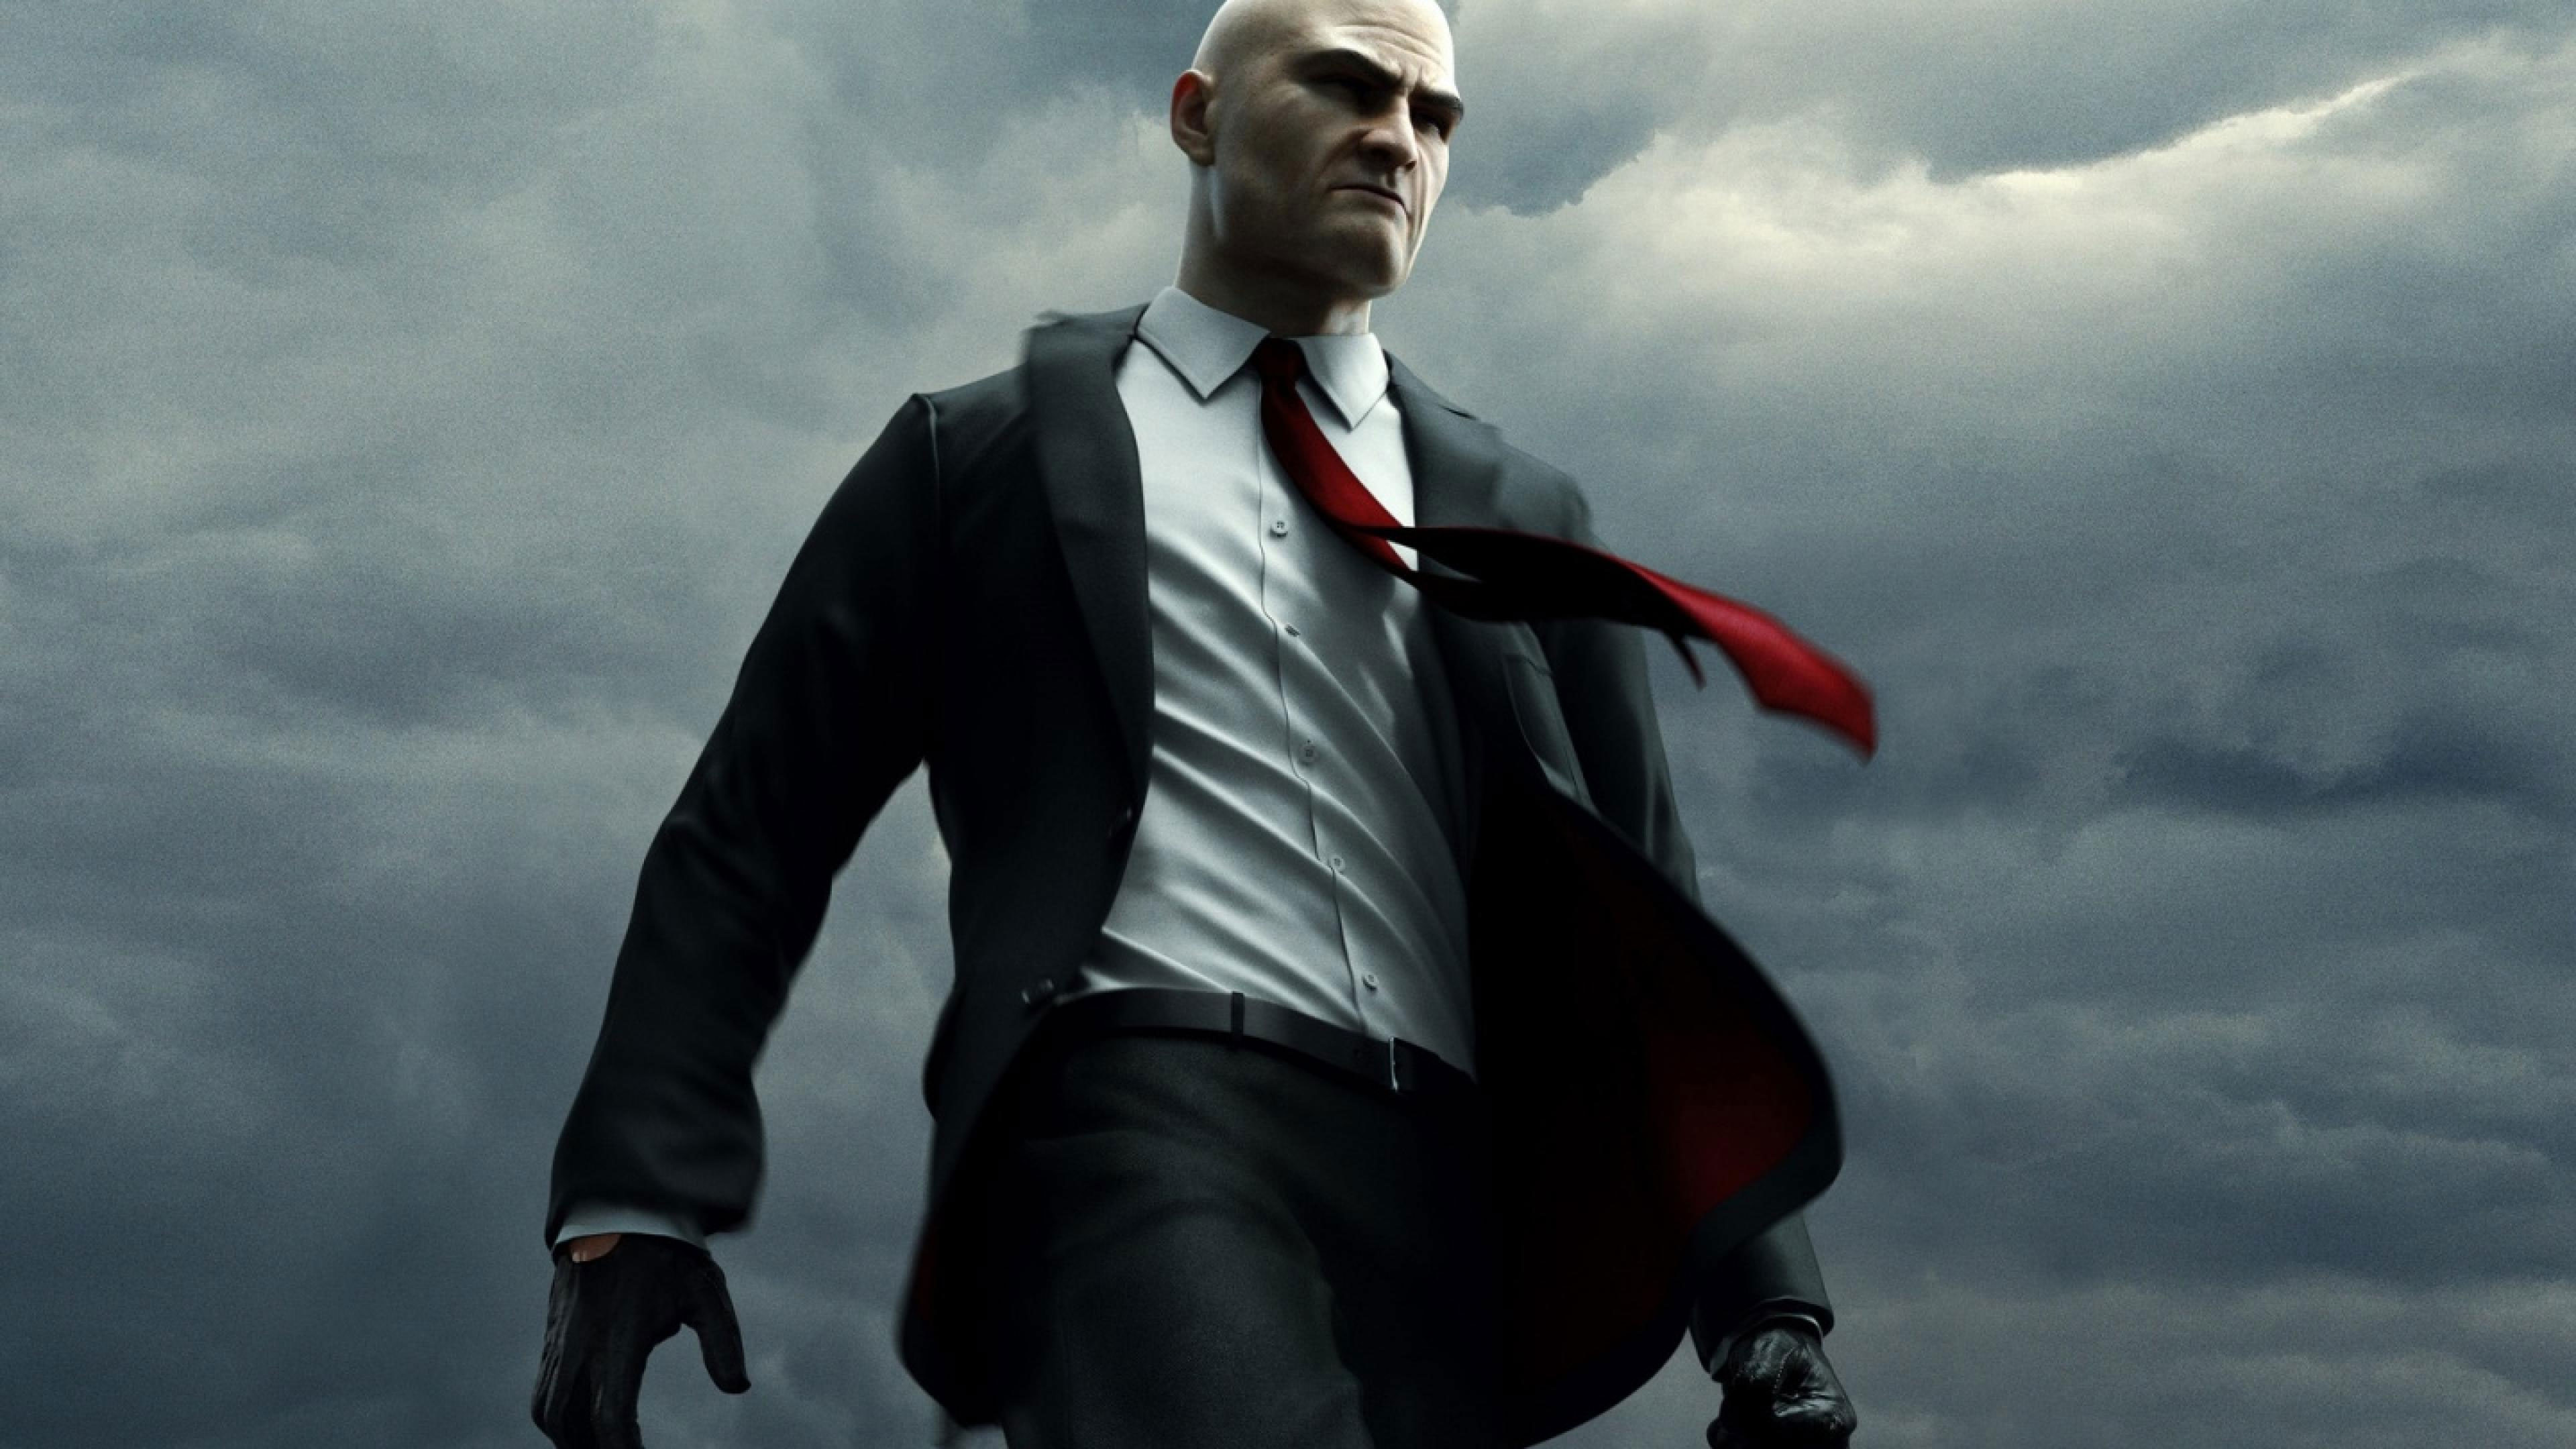 hitman 4k wallpaper,suit,photography,cool,formal wear,fictional character